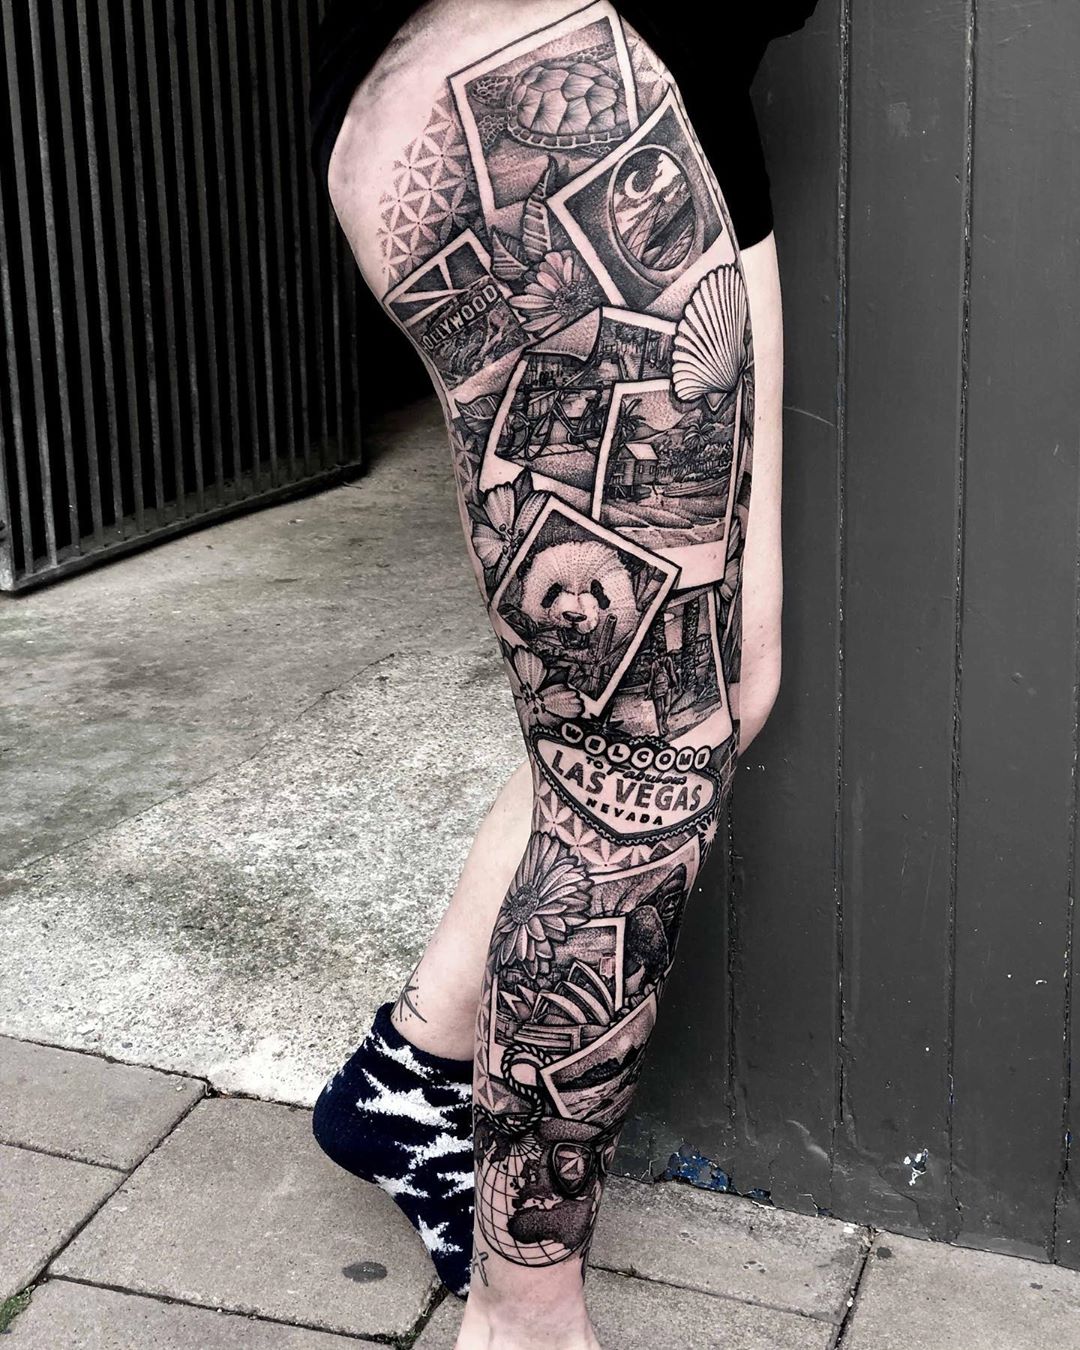 15 Leg Sleeve Tattoos You Have to See  TATTOO WORLD  YouTube